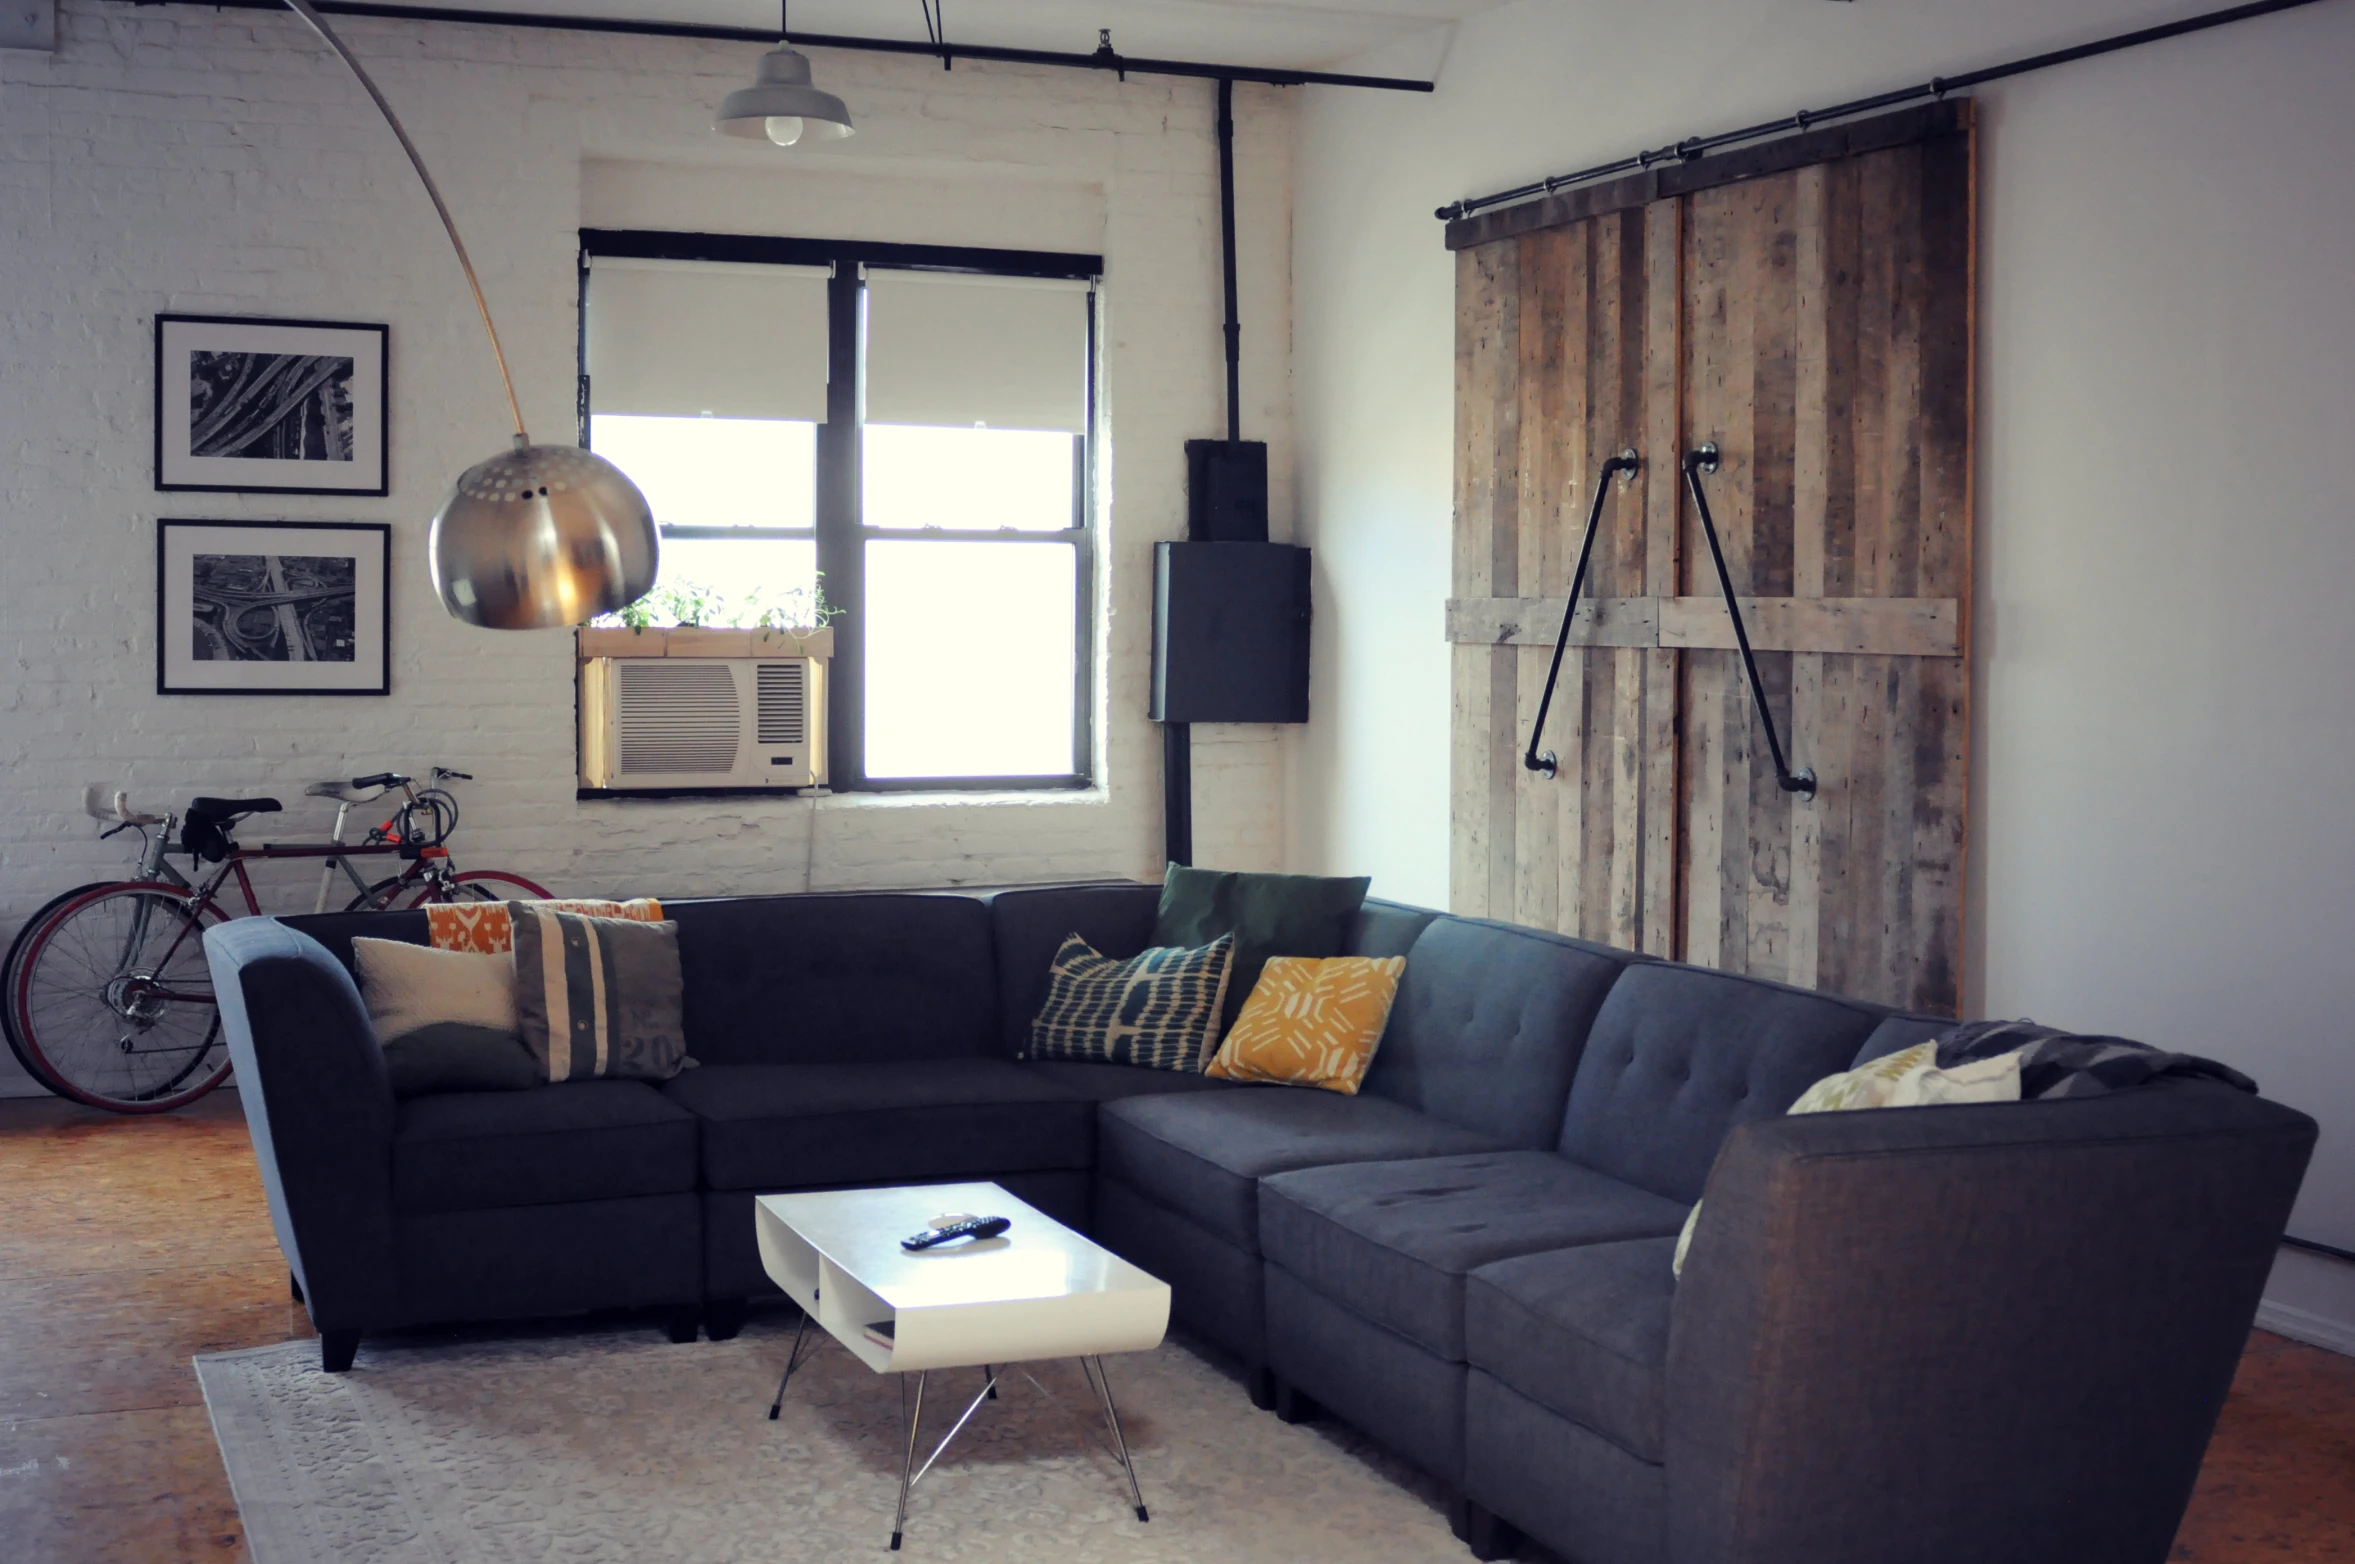 a sectional sofa is a focal point in a living room